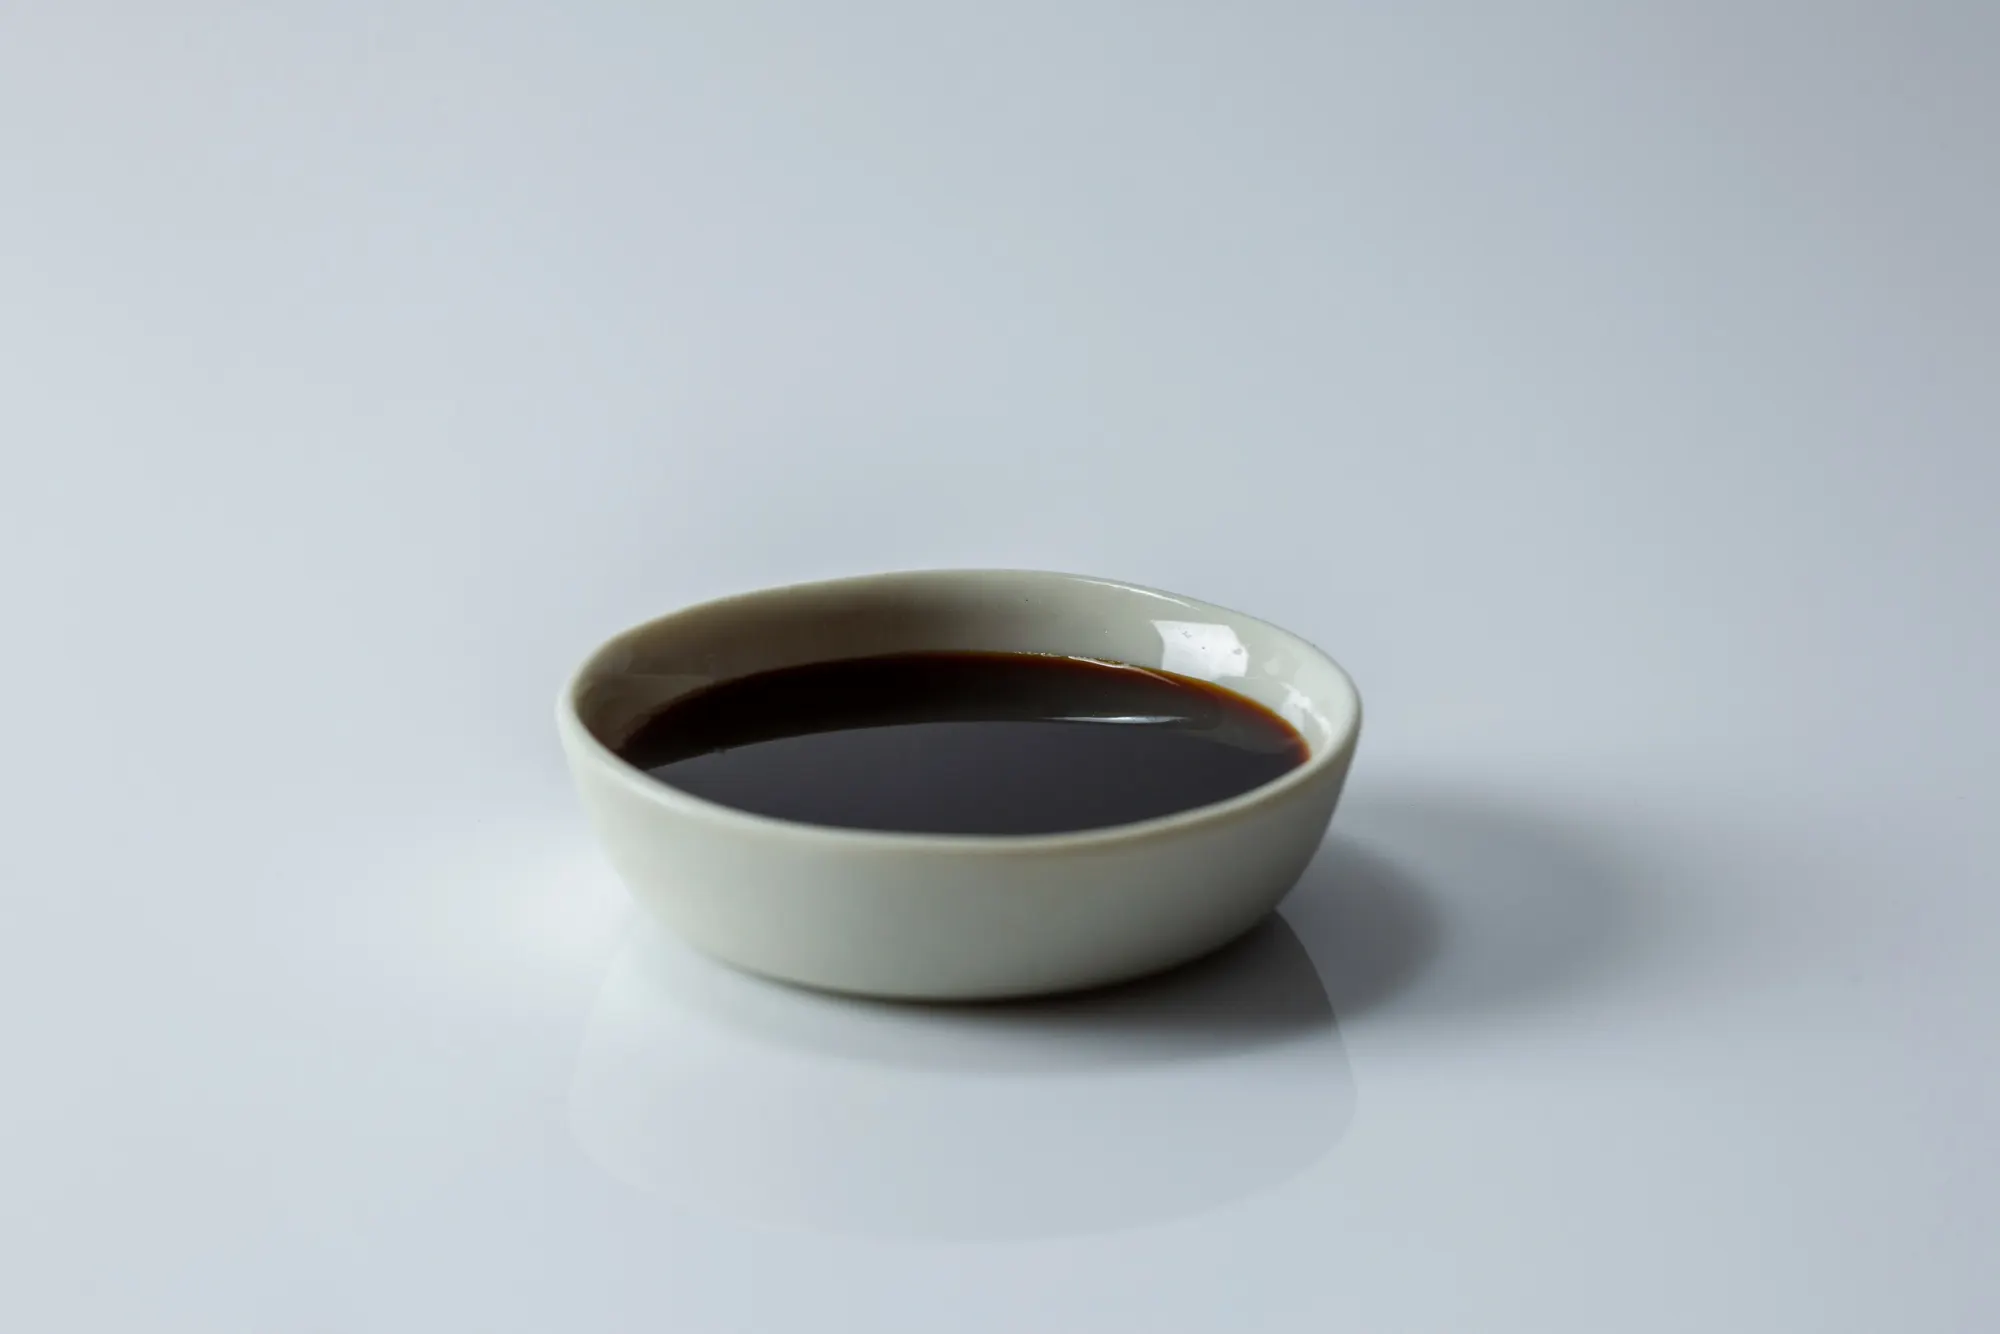 a small shallow ceramic bowl filled with soy sauce